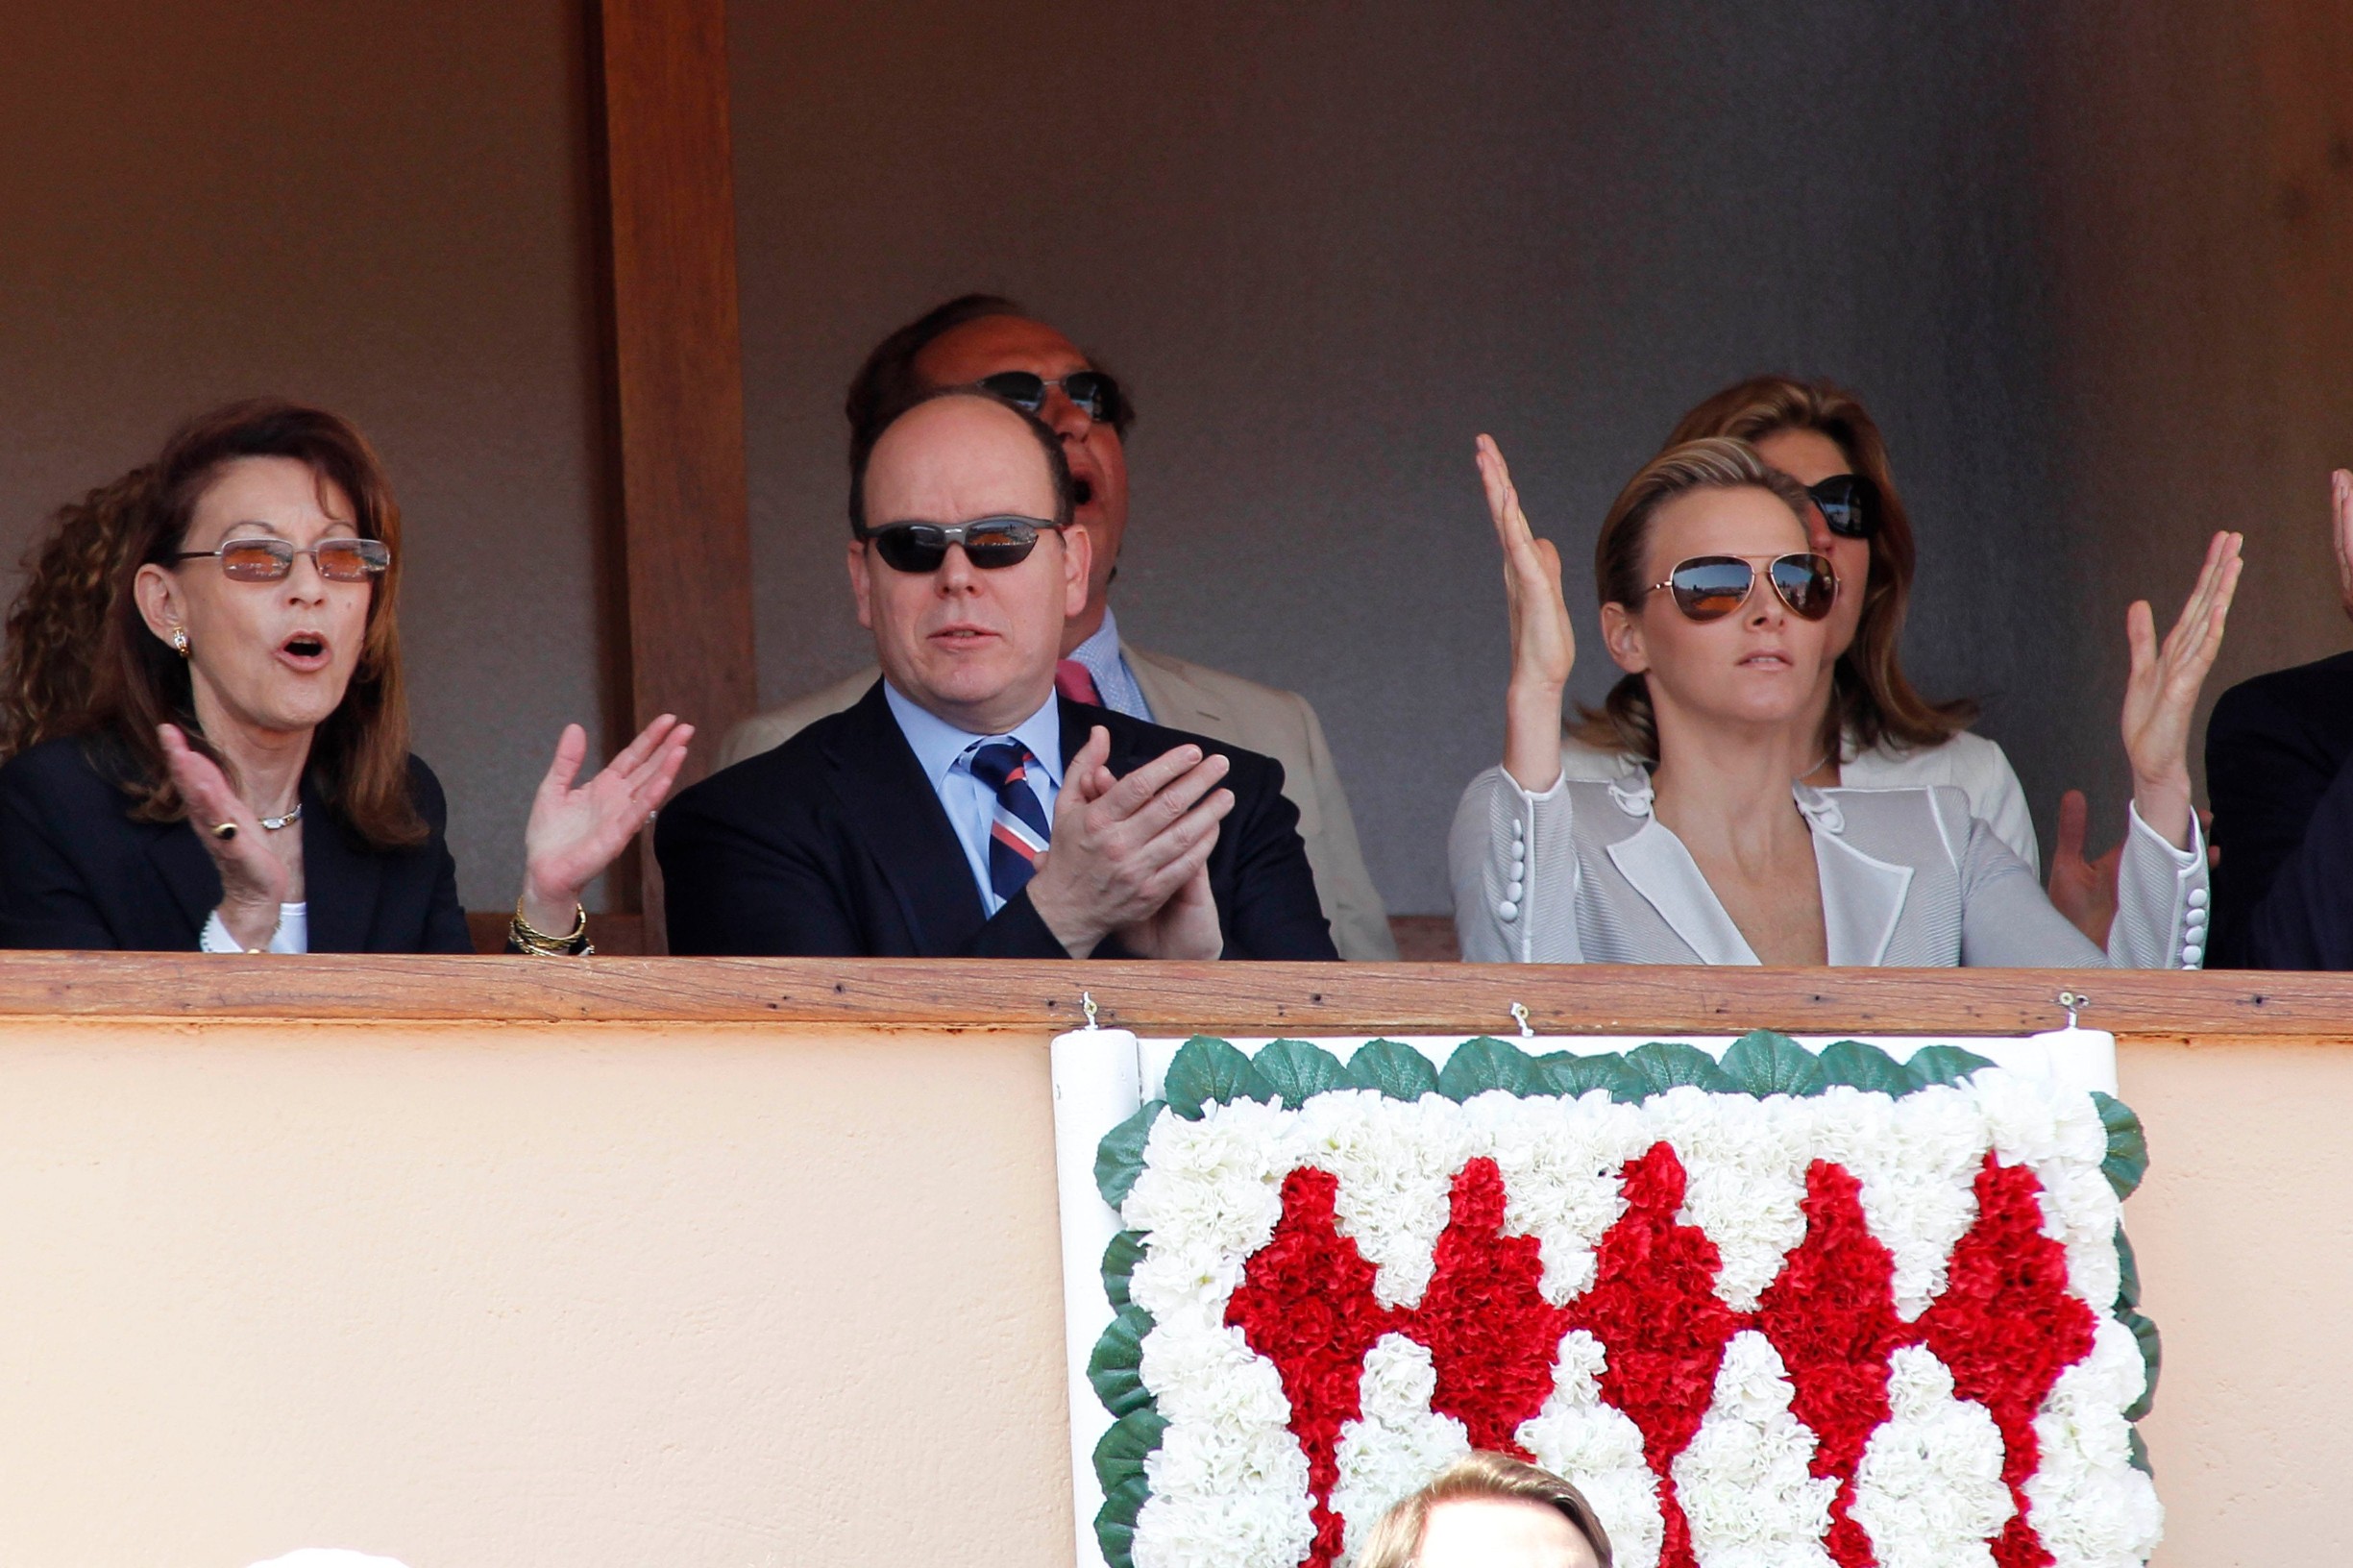 Elisabeth Ann de Massy (L), Prince Albert II of Monaco and his girl friend Charlene Wittstock during the final match Rafael Nadal of Spain against his compatriot Fernando Verdasco at the Monte-Carlo Rolex Master tournament in Roquebrune-Cap-Martin, France, 18 April 2010. 
MONTECARLO 18-04-2010,Image: 56720926, License: Rights-managed, Restrictions: ., Model Release: no, Credit line: BEBERT / The Photo One / Profimedia